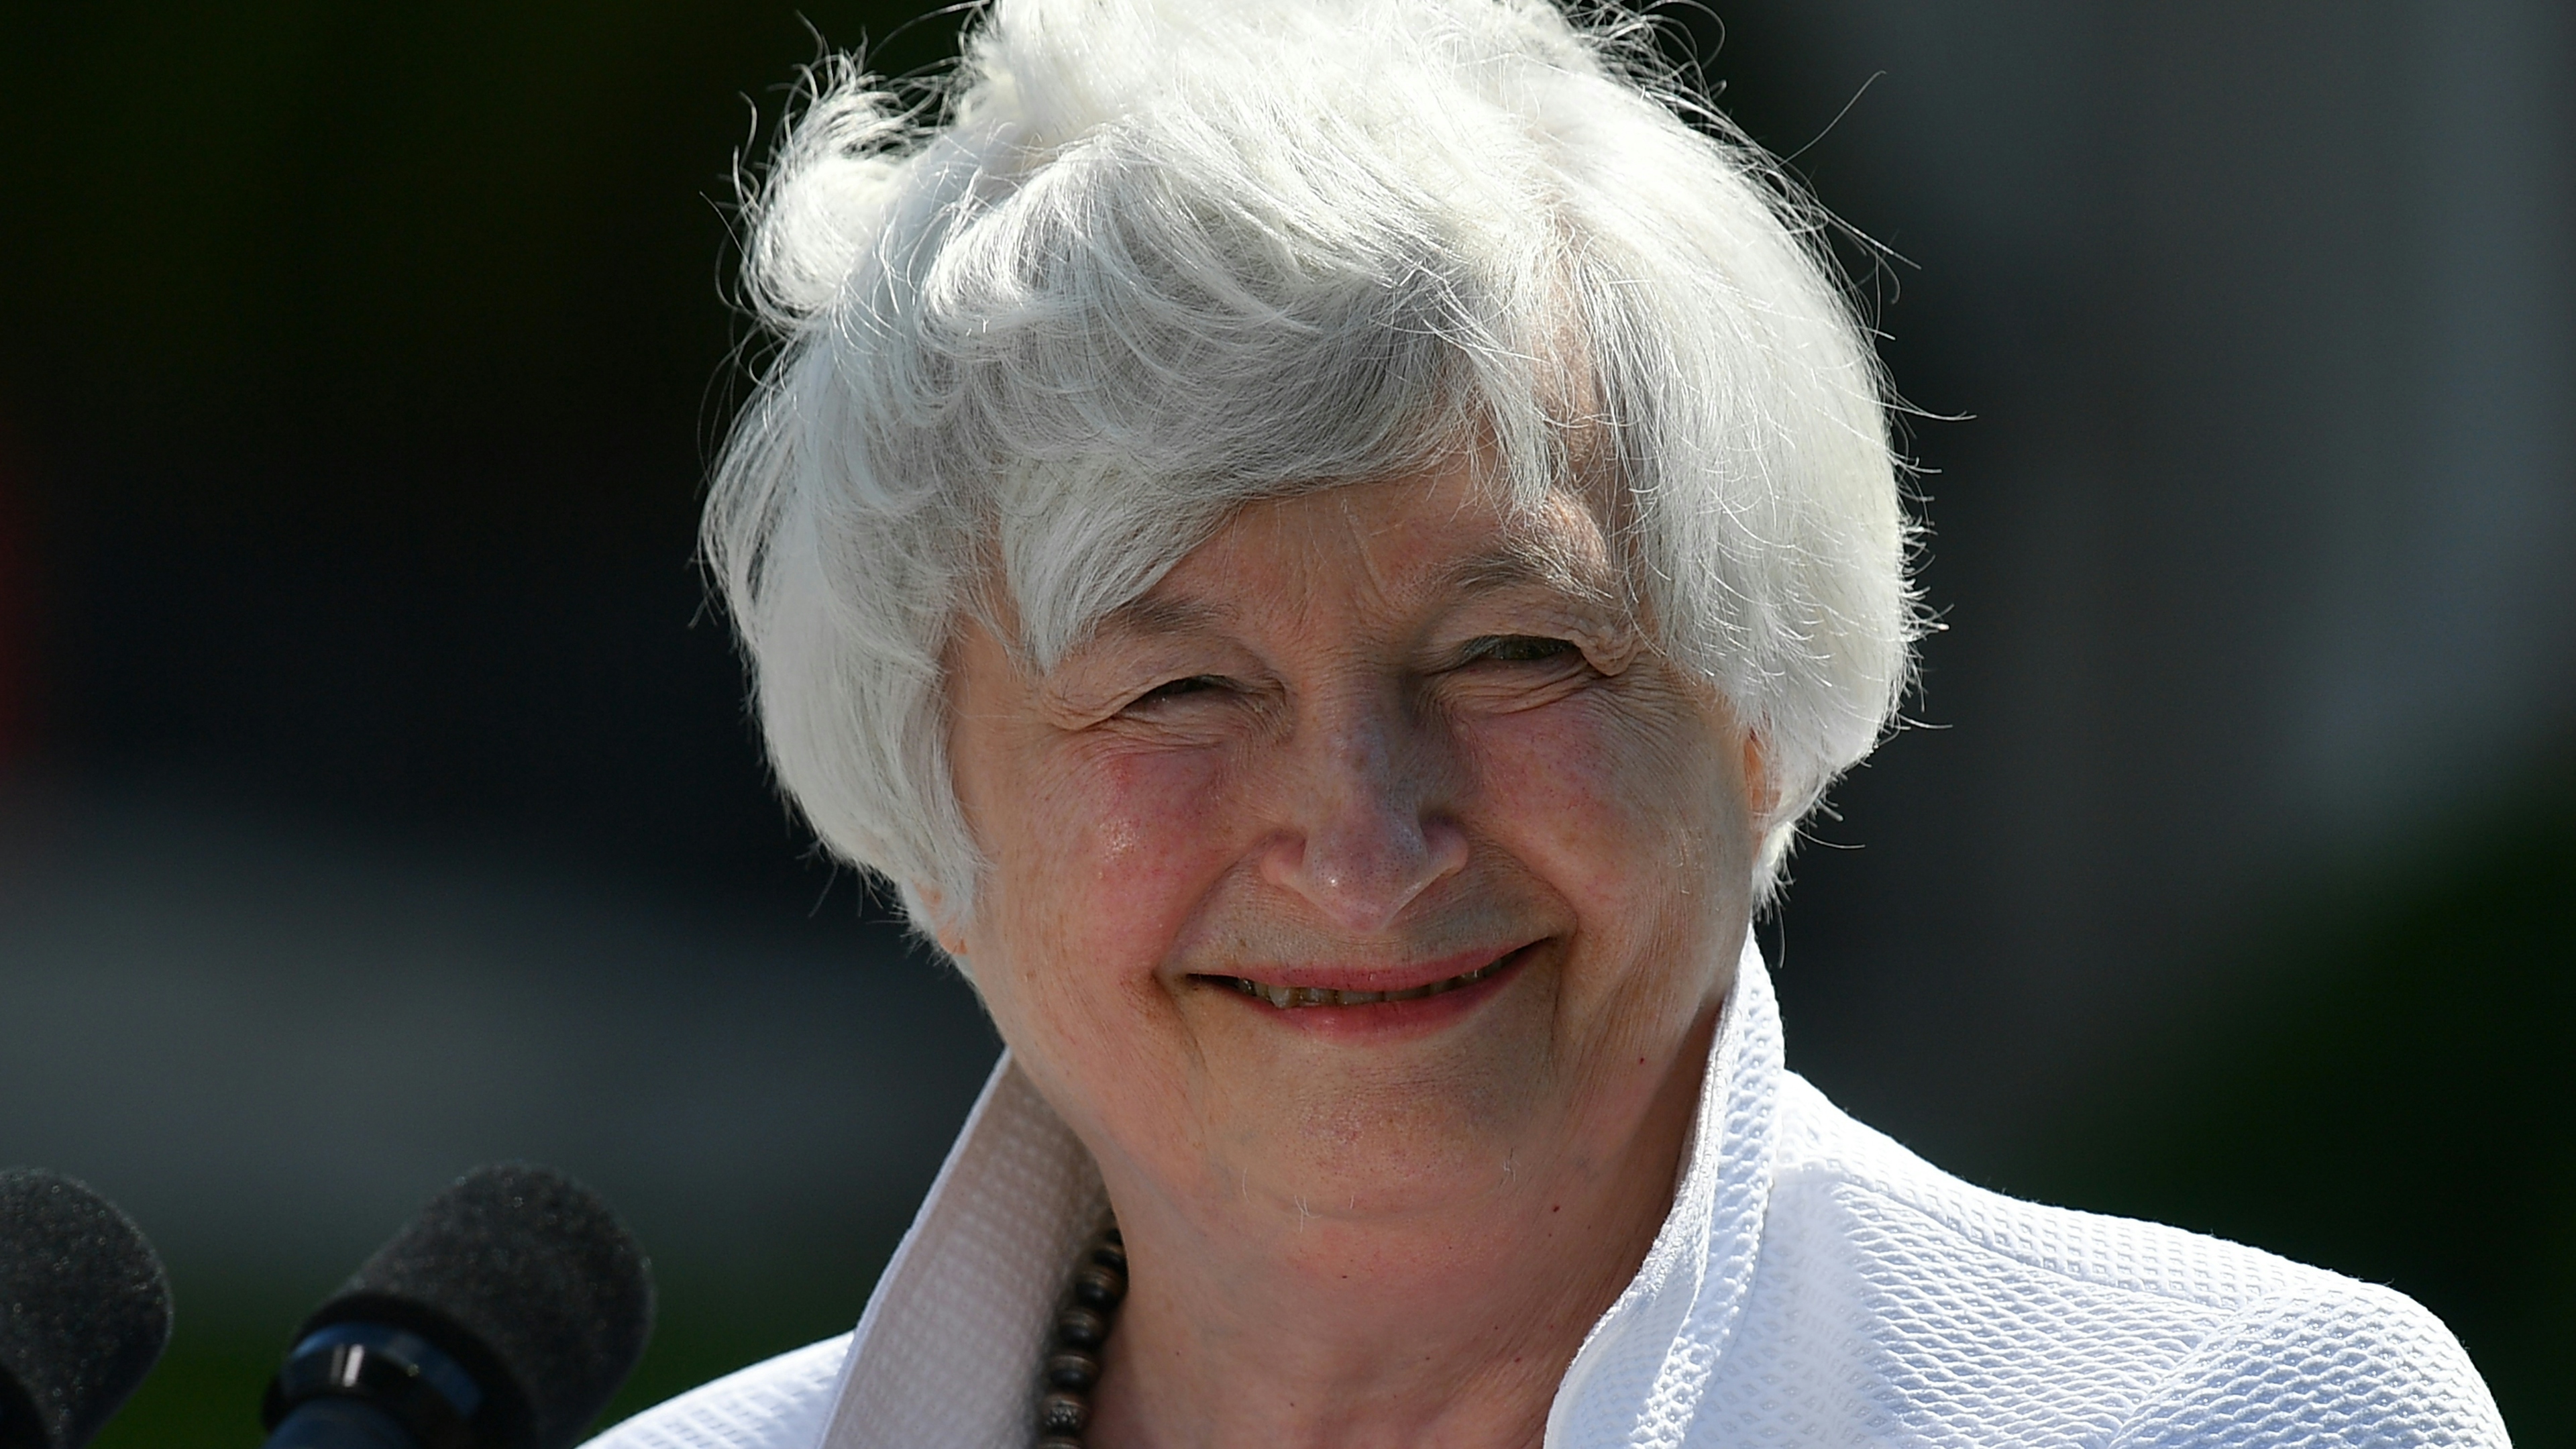 US Treasury Secretary, Janet Yellen smiles during a press conference after attending the G7 Finance Ministers meeting at Winfield House on June 5, 2021 in London, England.